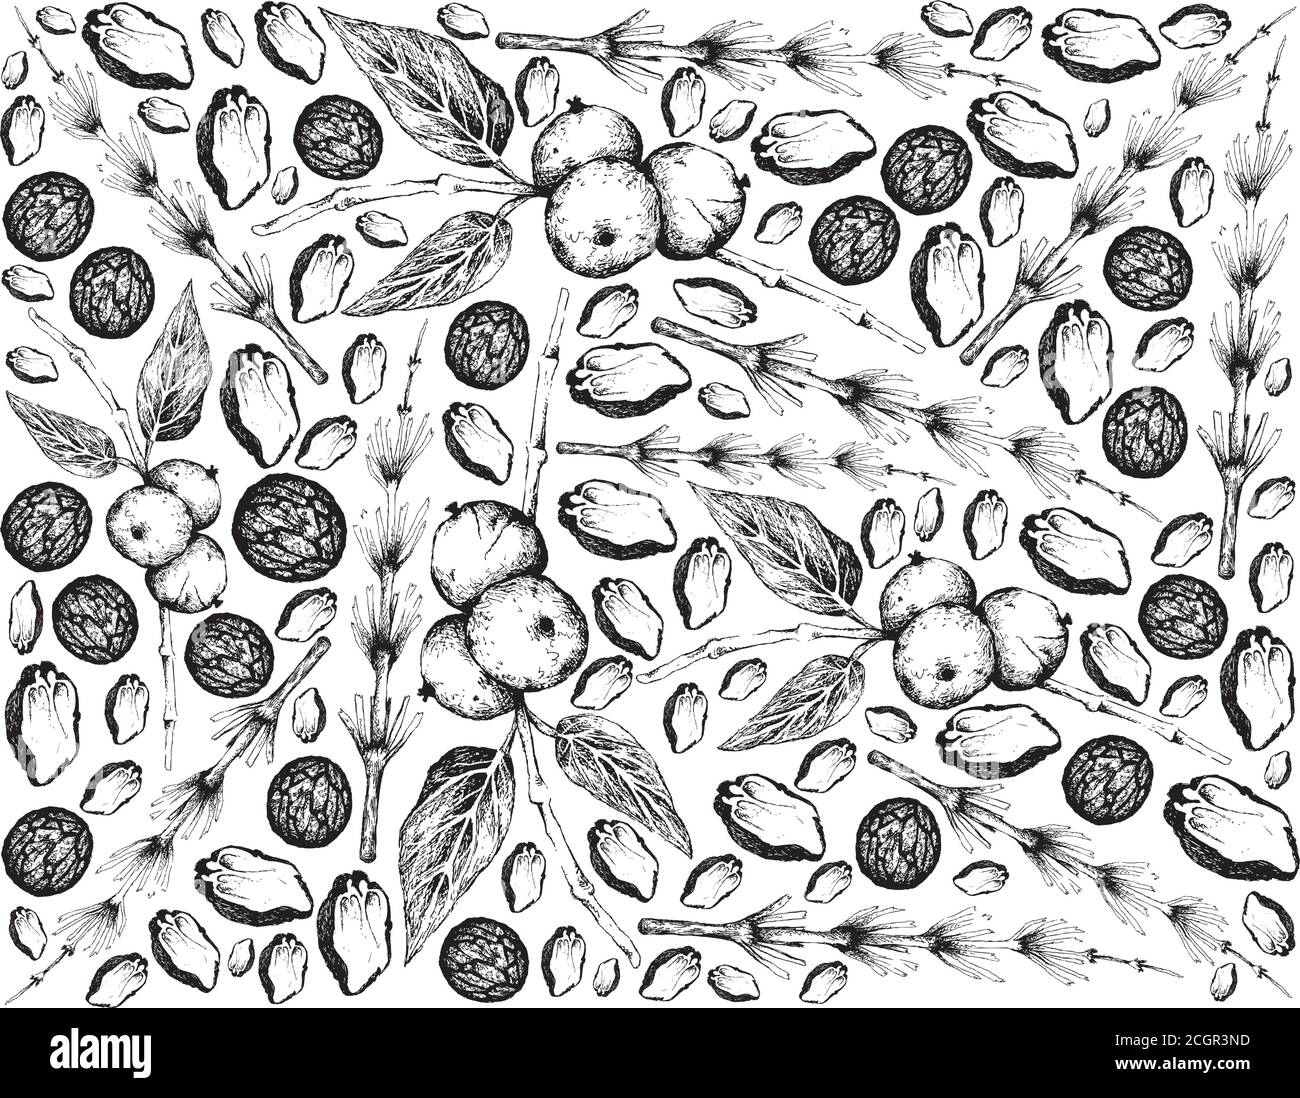 Illustration Hand Drawn Sketch Background of Black Walnuts or Juglans Nigra and Equisetum, Horsetail, Snake Grass or Puzzlegrass Plants. Stock Vector